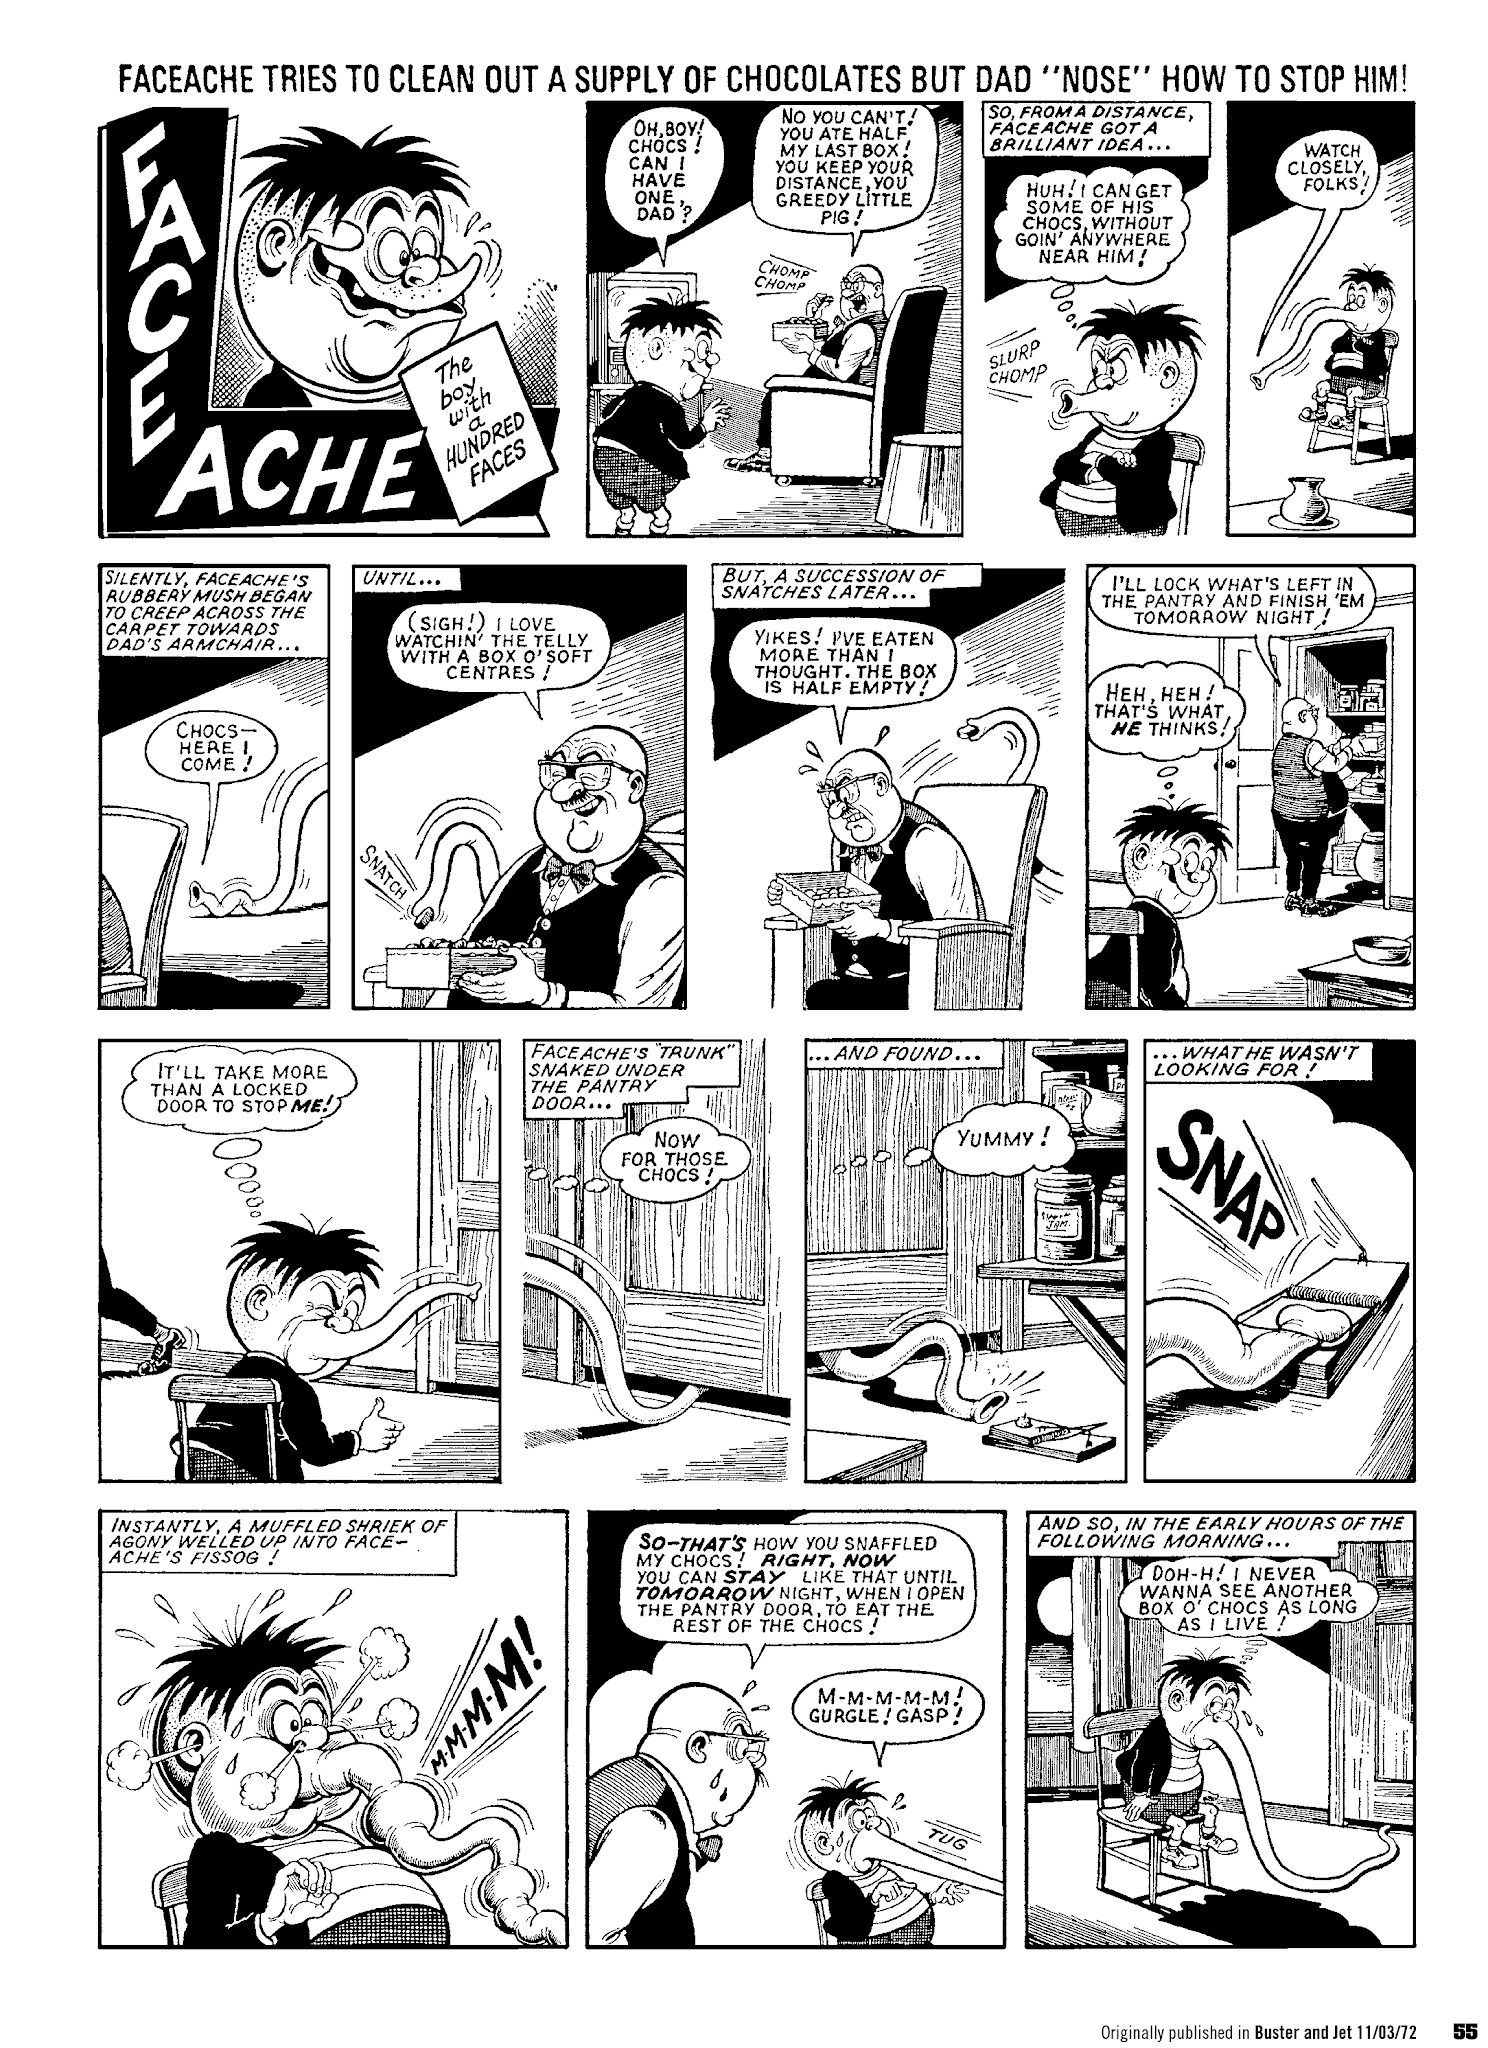 Read online Faceache: The First Hundred Scrunges comic -  Issue # TPB 1 - 57